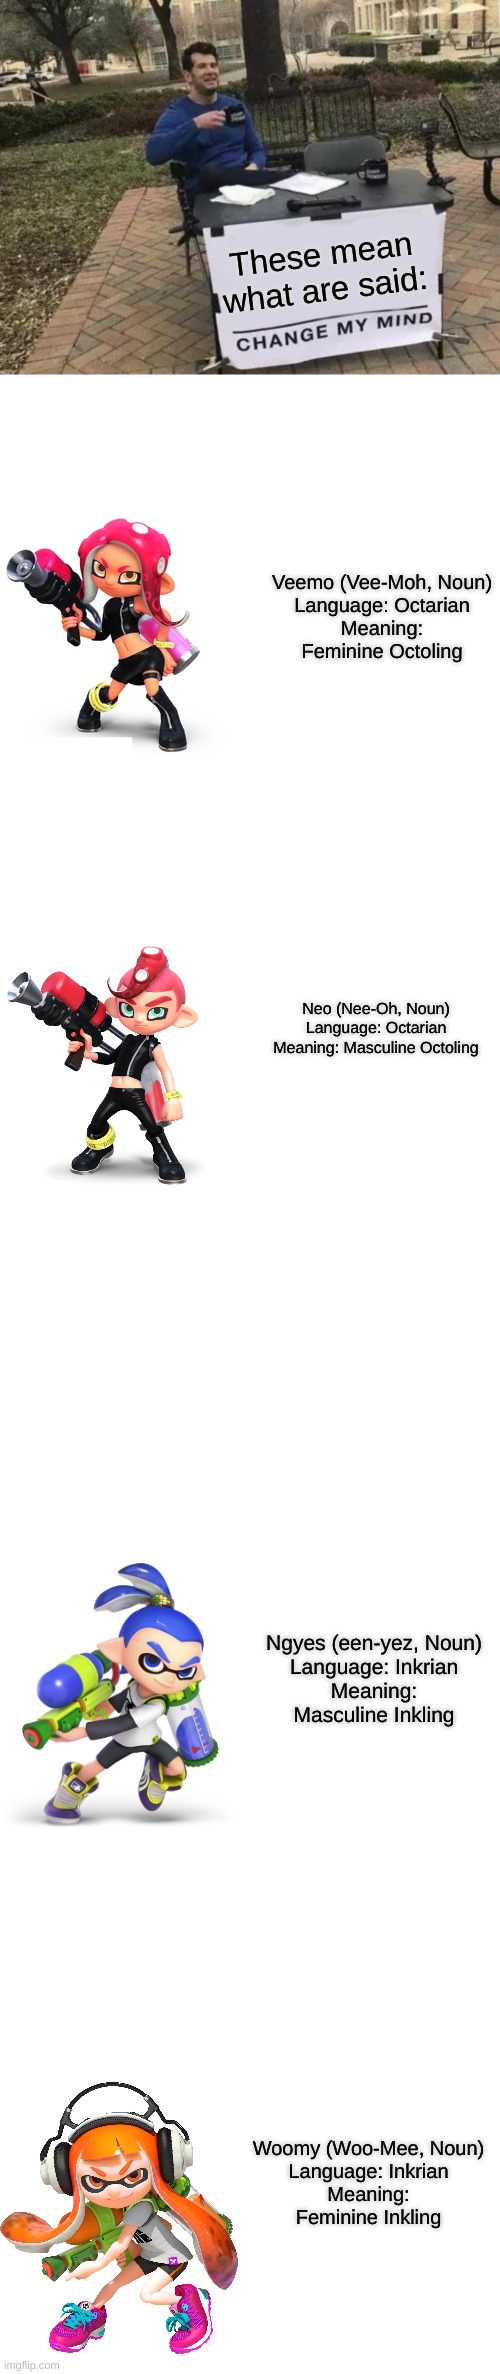 Work it! | These mean what are said:; Veemo (Vee-Moh, Noun)
Language: Octarian
Meaning: Feminine Octoling; Neo (Nee-Oh, Noun)
Language: Octarian
Meaning: Masculine Octoling; Ngyes (een-yez, Noun)
Language: Inkrian
Meaning: Masculine Inkling; Woomy (Woo-Mee, Noun)
Language: Inkrian
Meaning: Feminine Inkling | image tagged in memes,change my mind,blank transparent square | made w/ Imgflip meme maker